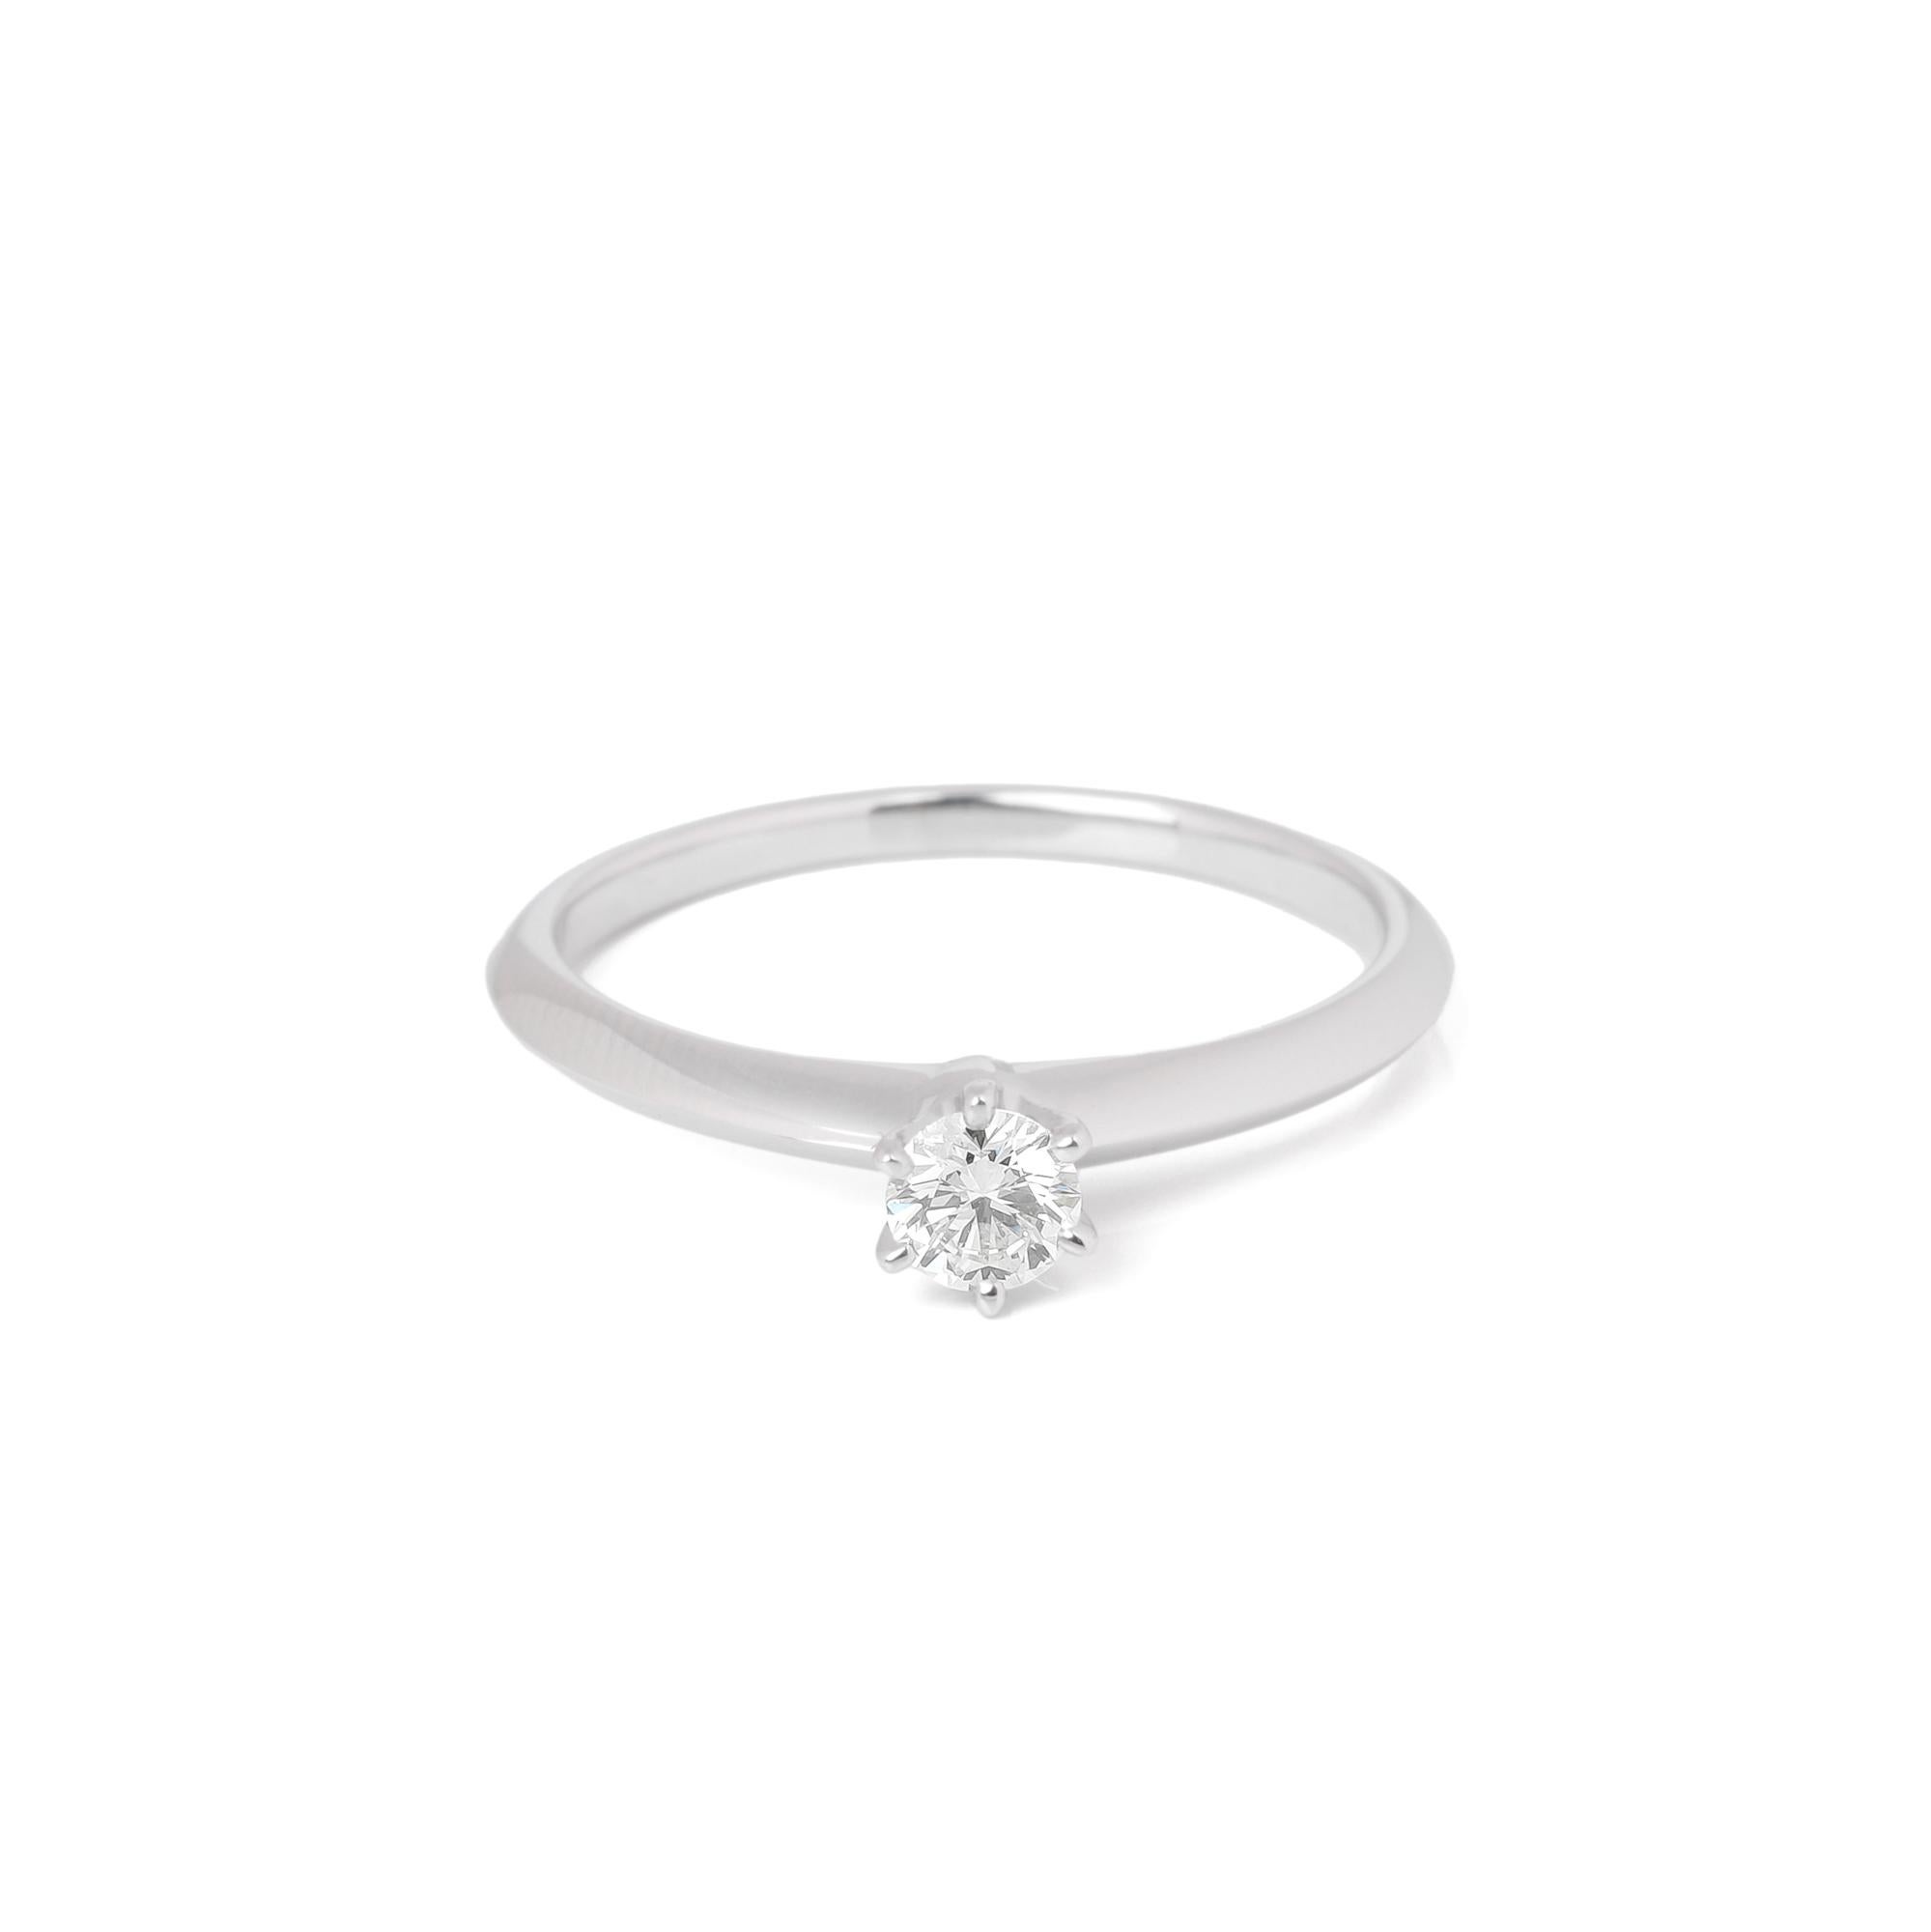 Tiffany & Co Setting 0.24 Carat Diamond Solitaire Ring In Excellent Condition For Sale In Bishop's Stortford, Hertfordshire